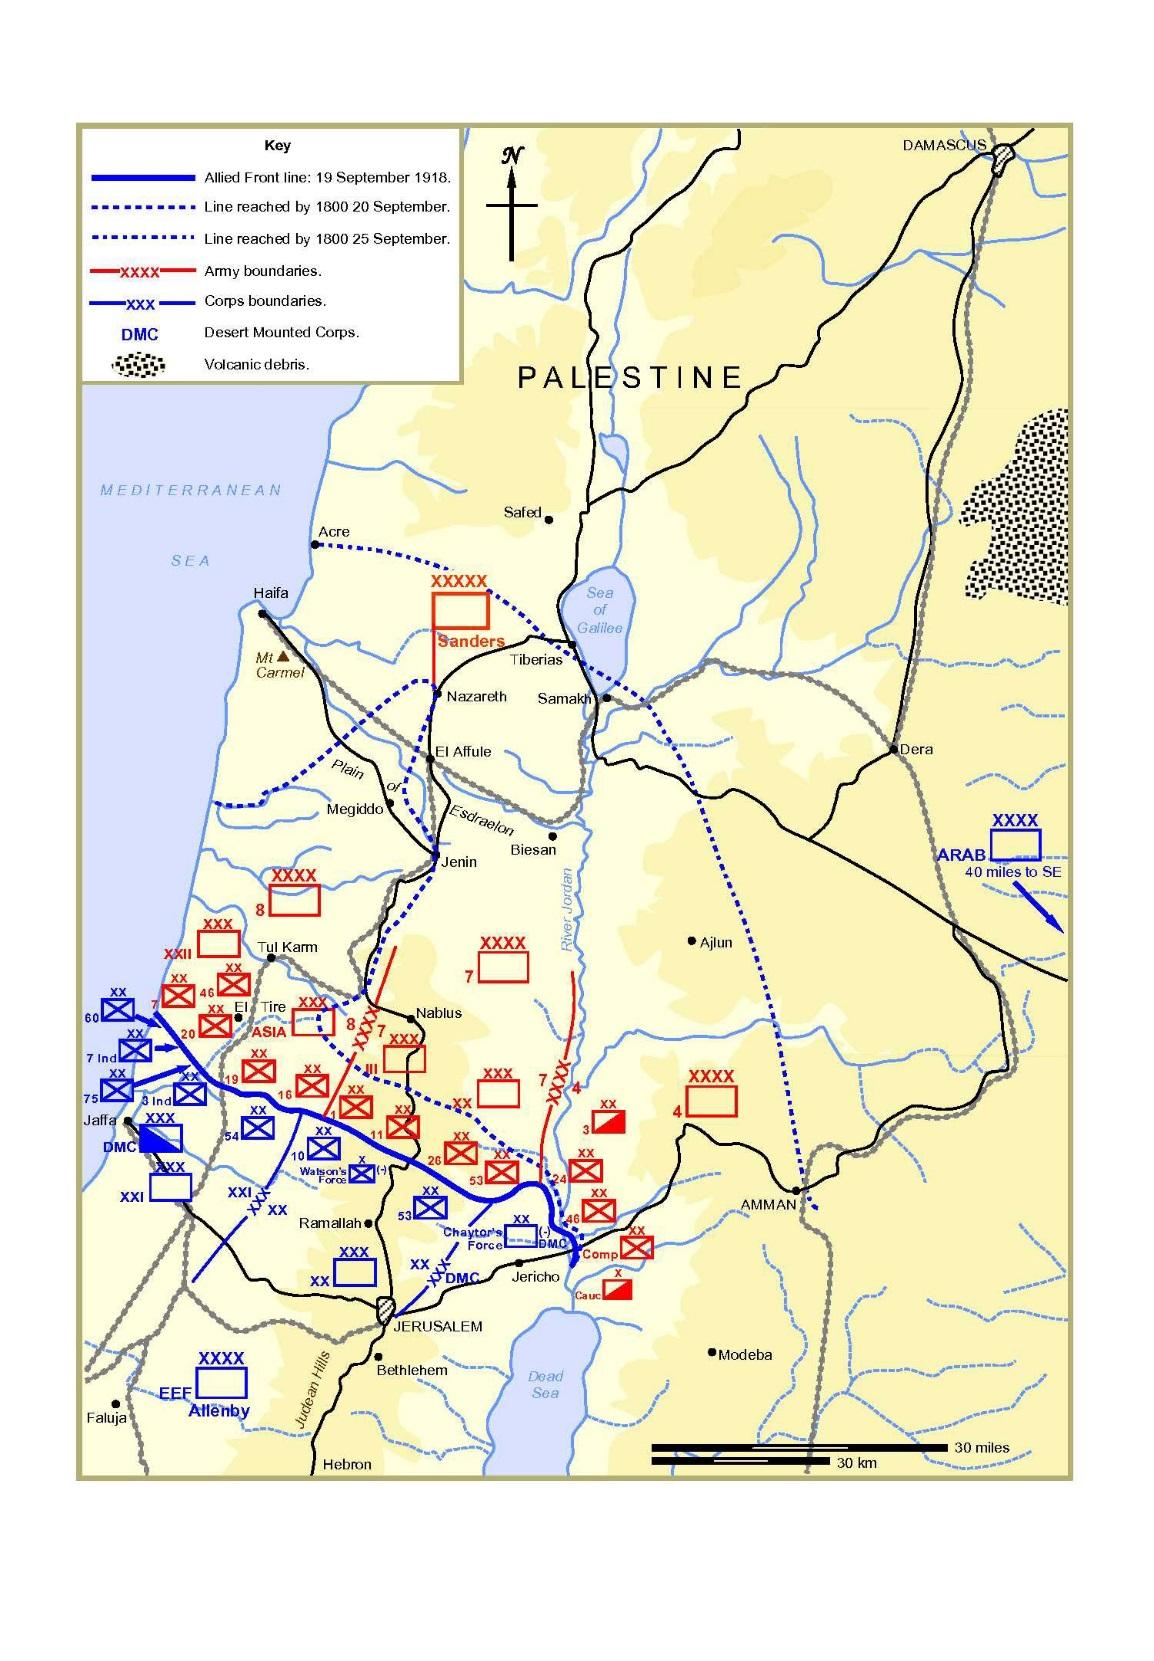 Force dispositions for the Battle of Megiddo 19-25 September 1918. Allied forces shown in blue, Ottoman forces in red. Courtesy UK MOD